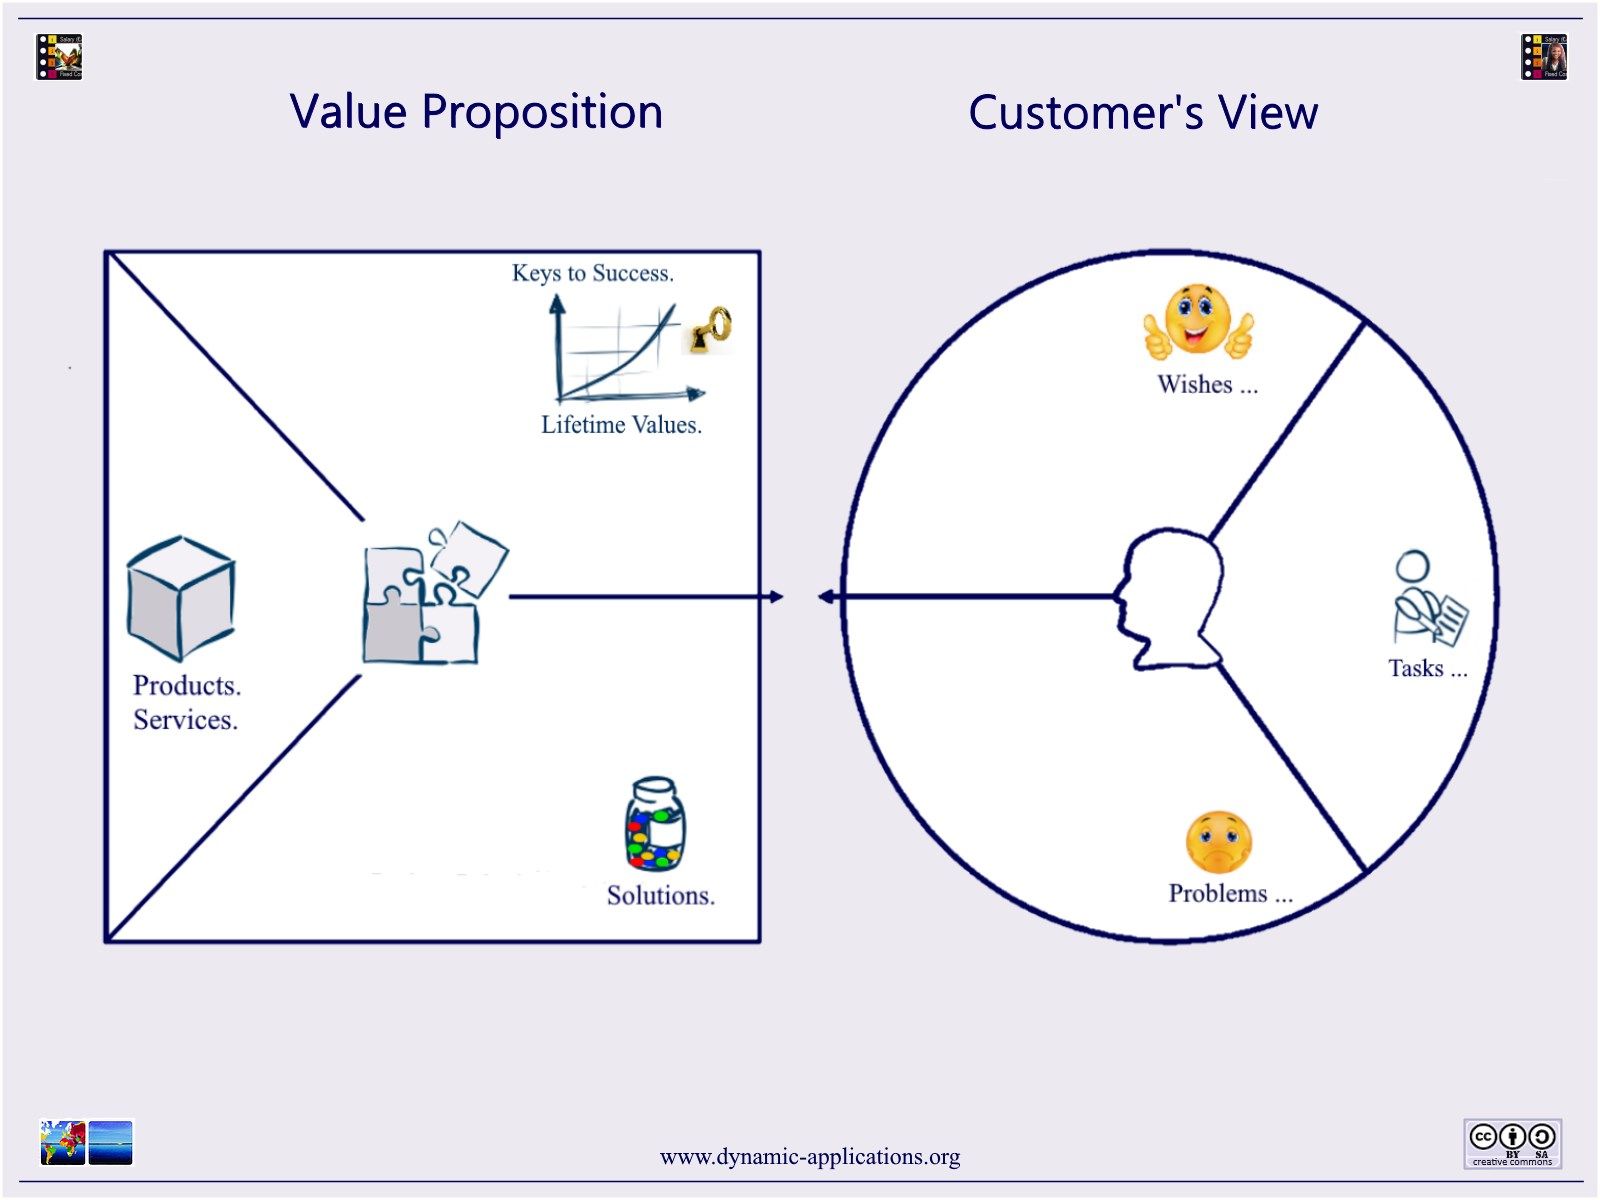 Value Proposition Canvas - define your offering in Lifetime Value ($€& / h).